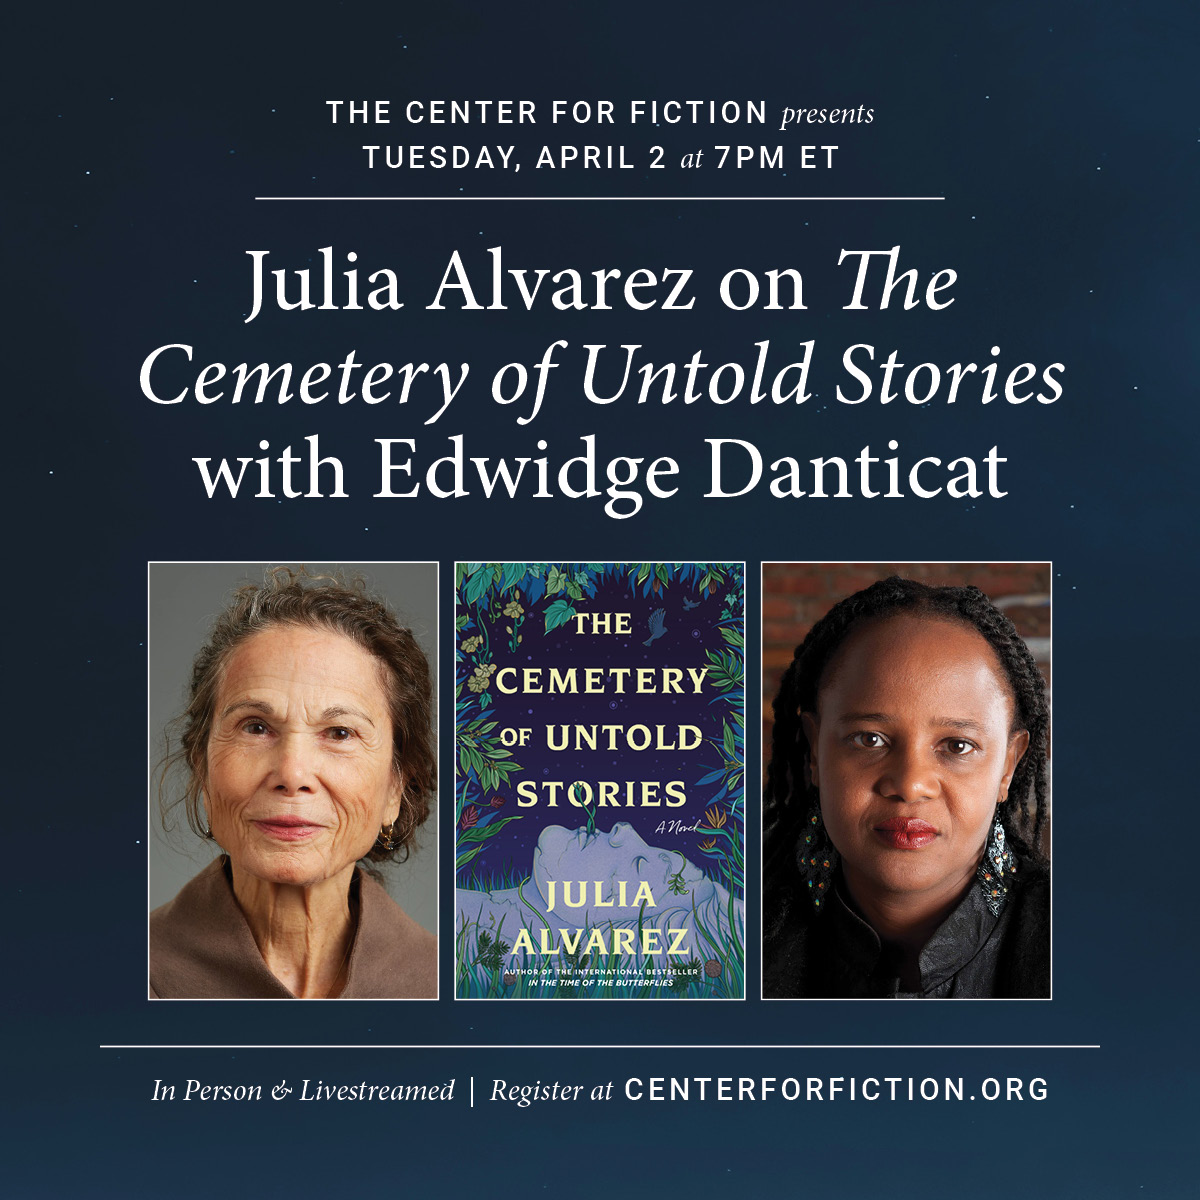 Two literary icons join us 4/2! Julia Alvarez will be in conversation with Edwidge Danticat to celebrate Alvarez's latest novel, The Cemetery of Untold Stories. Get your tickets here: tinyurl.com/ydnepcn5